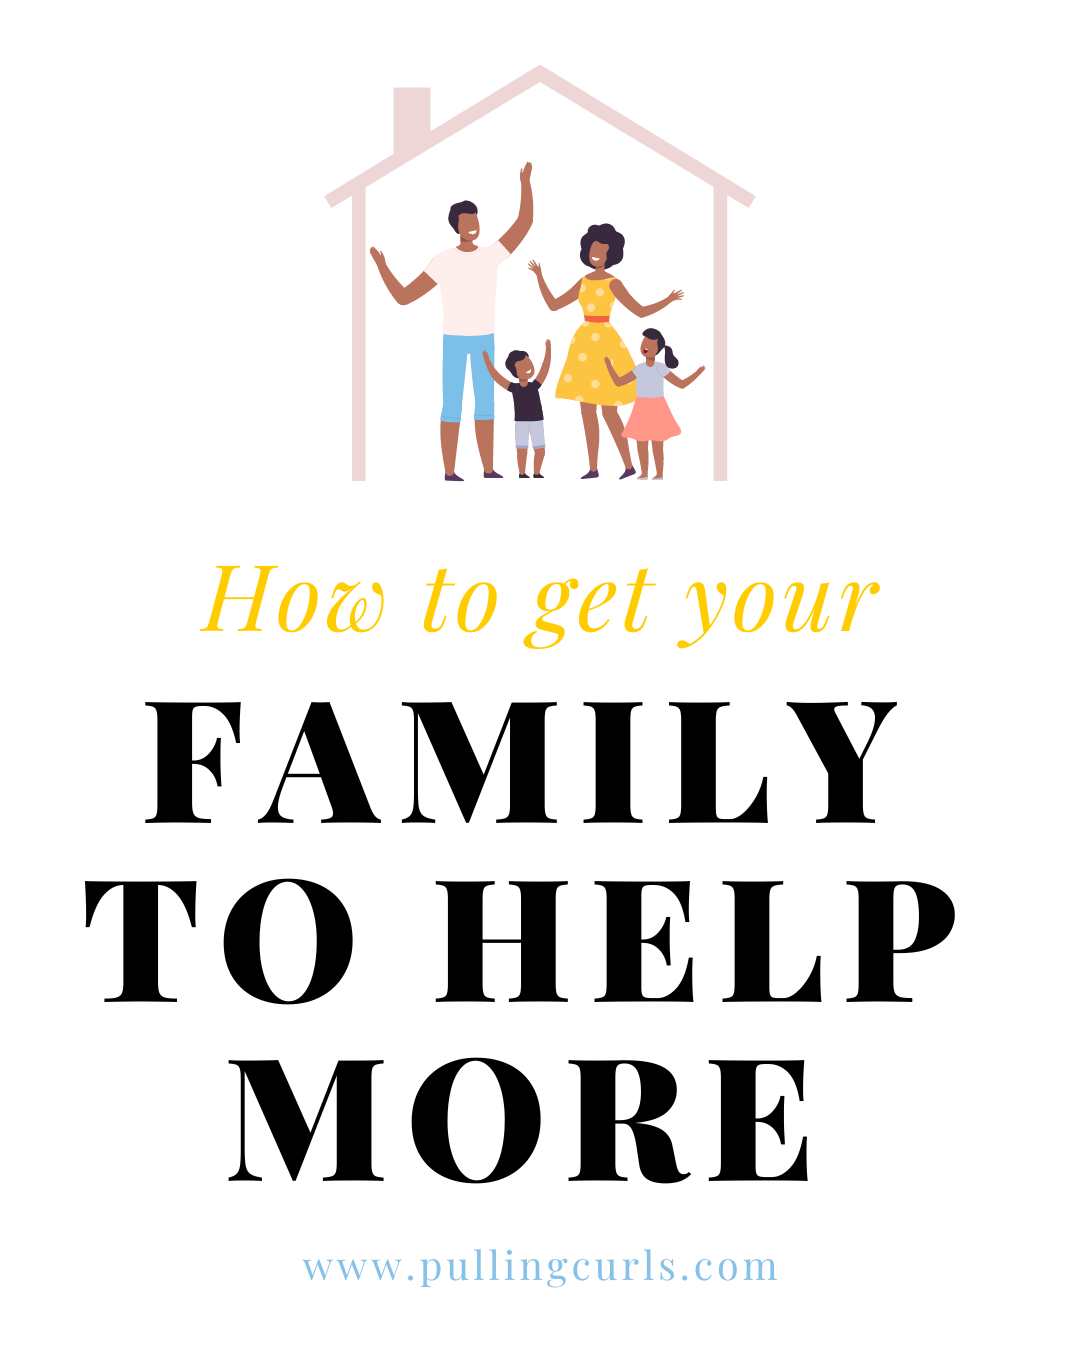 "5 Practical Tips to Get Your Kids to Help Out More at Home. Learn how to involve your family in household chores, set clear expectations, make it fun, encourage self-sufficiency, and more. Find out how to create a collaborative and efficient home environment. #ParentingHacks #FamilyChores #KidsResponsibility #HouseholdTips" via @pullingcurls